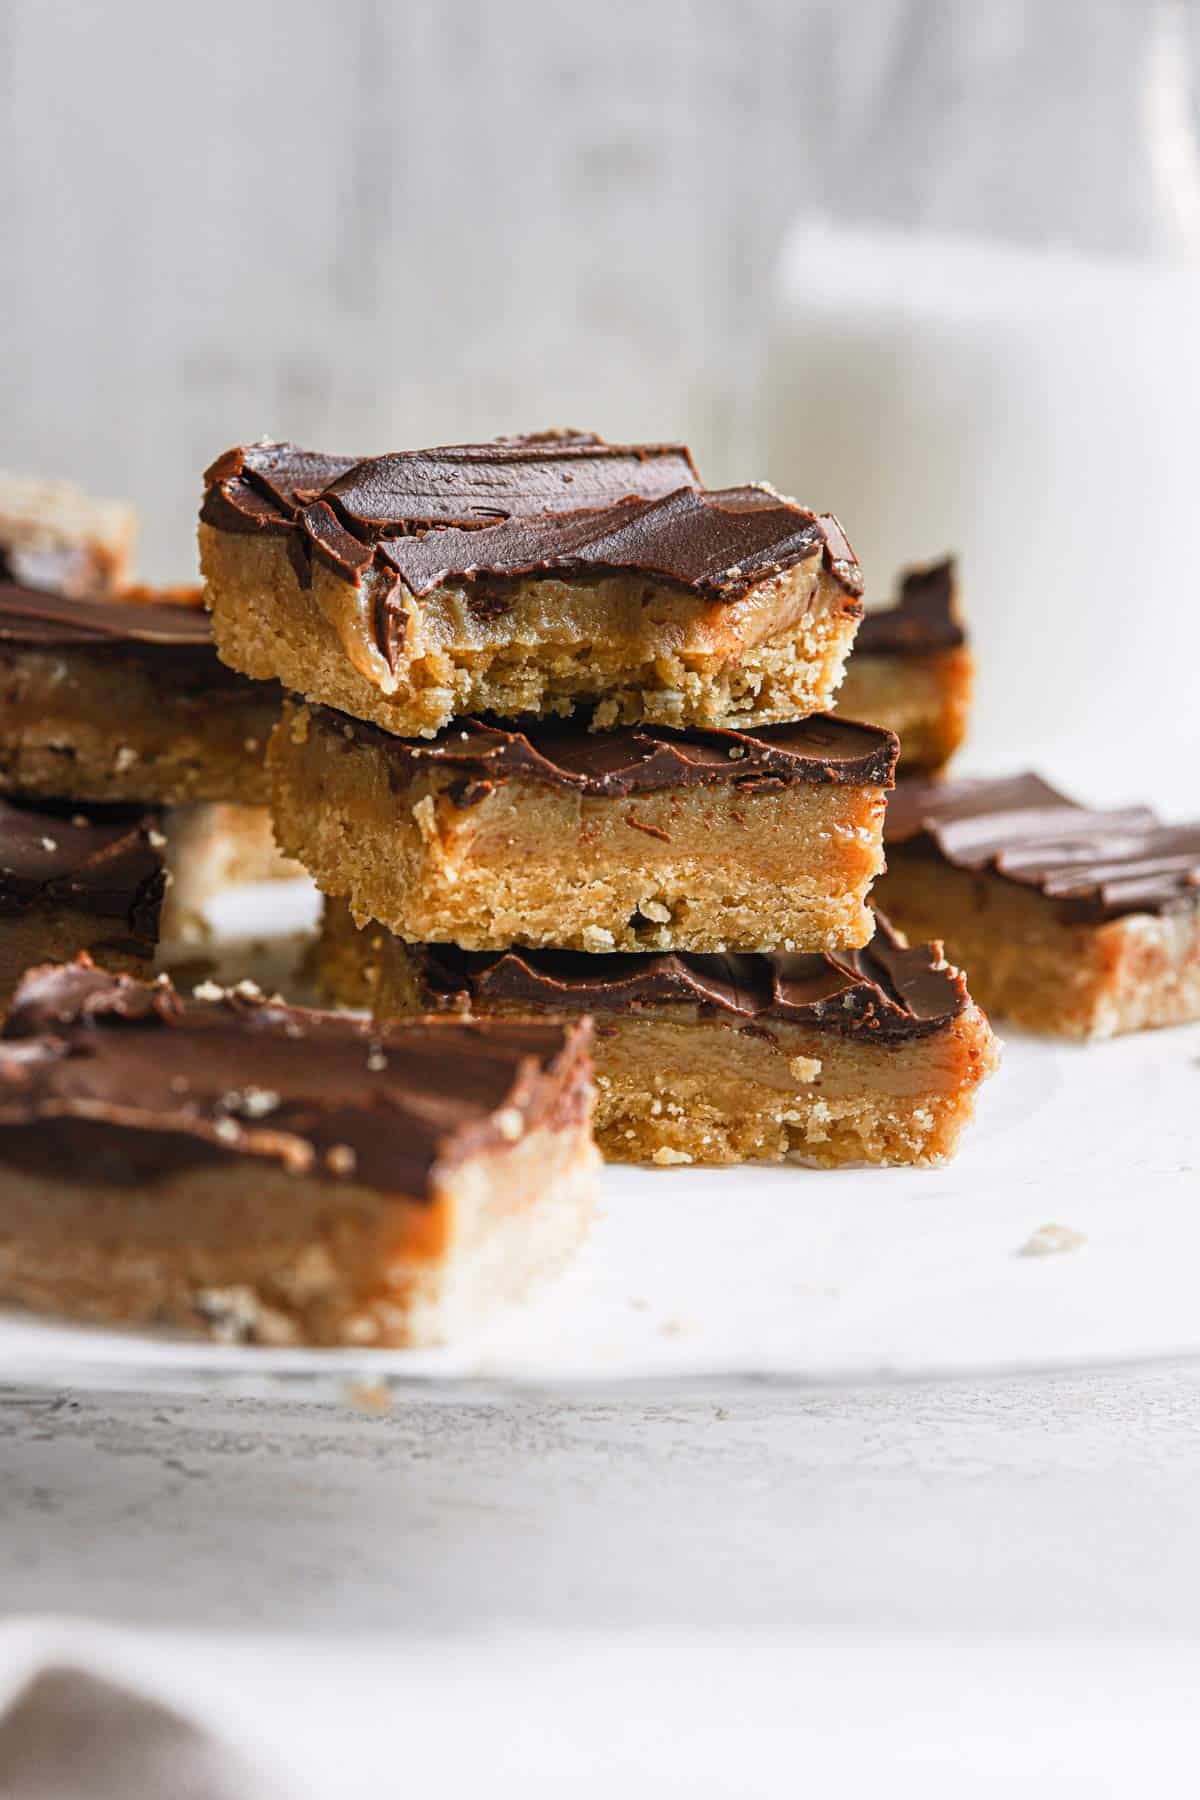 A stack of Millionaire's shortbread bars on a piece of parchment paper with the top bar missing a bite and a jug of milk in the back.